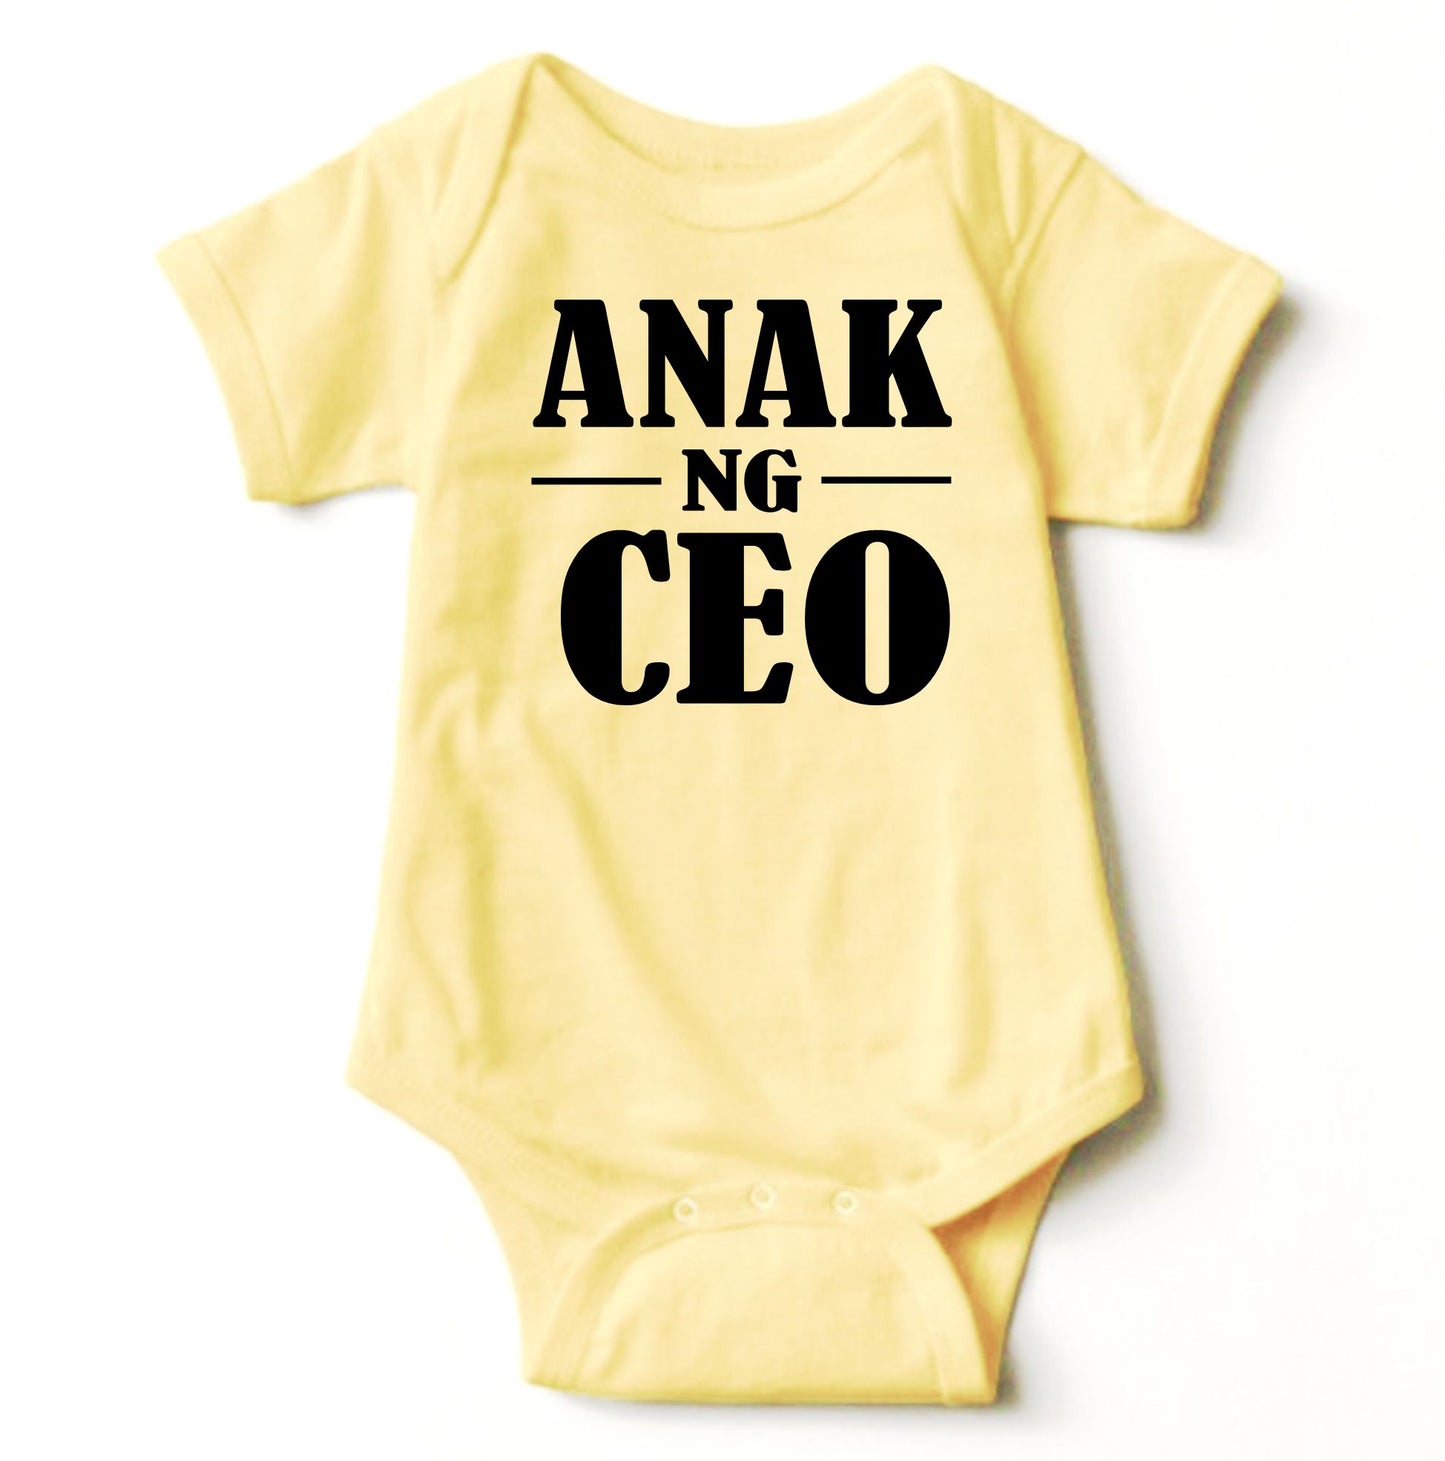 Baby Statement Onesies - Anak ng CEO